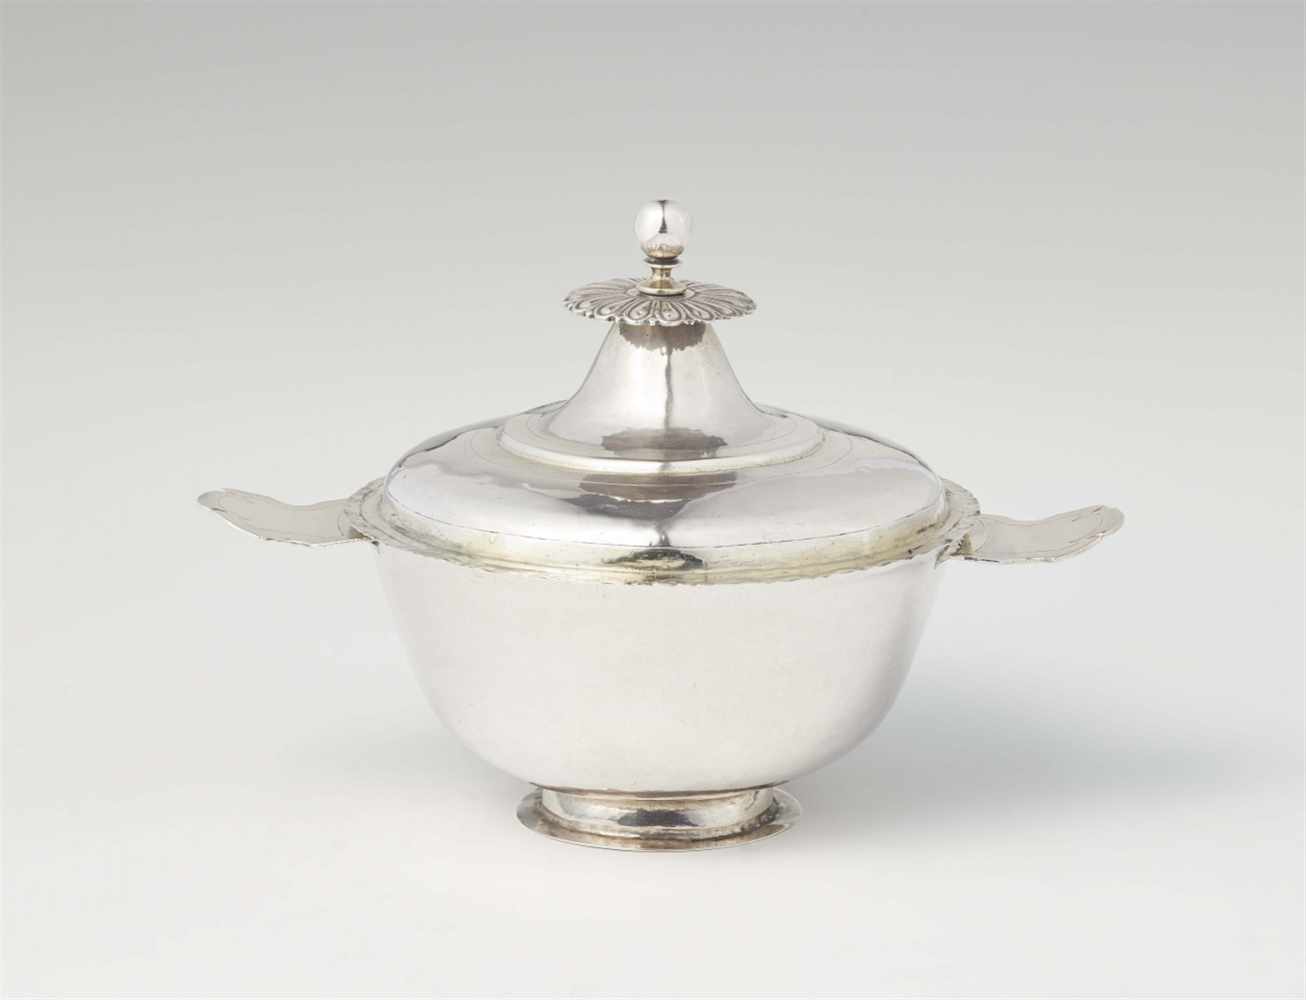 A Renaissance silver dish and coverInterior gilt dish with pierced handles on waisted basal rim. The